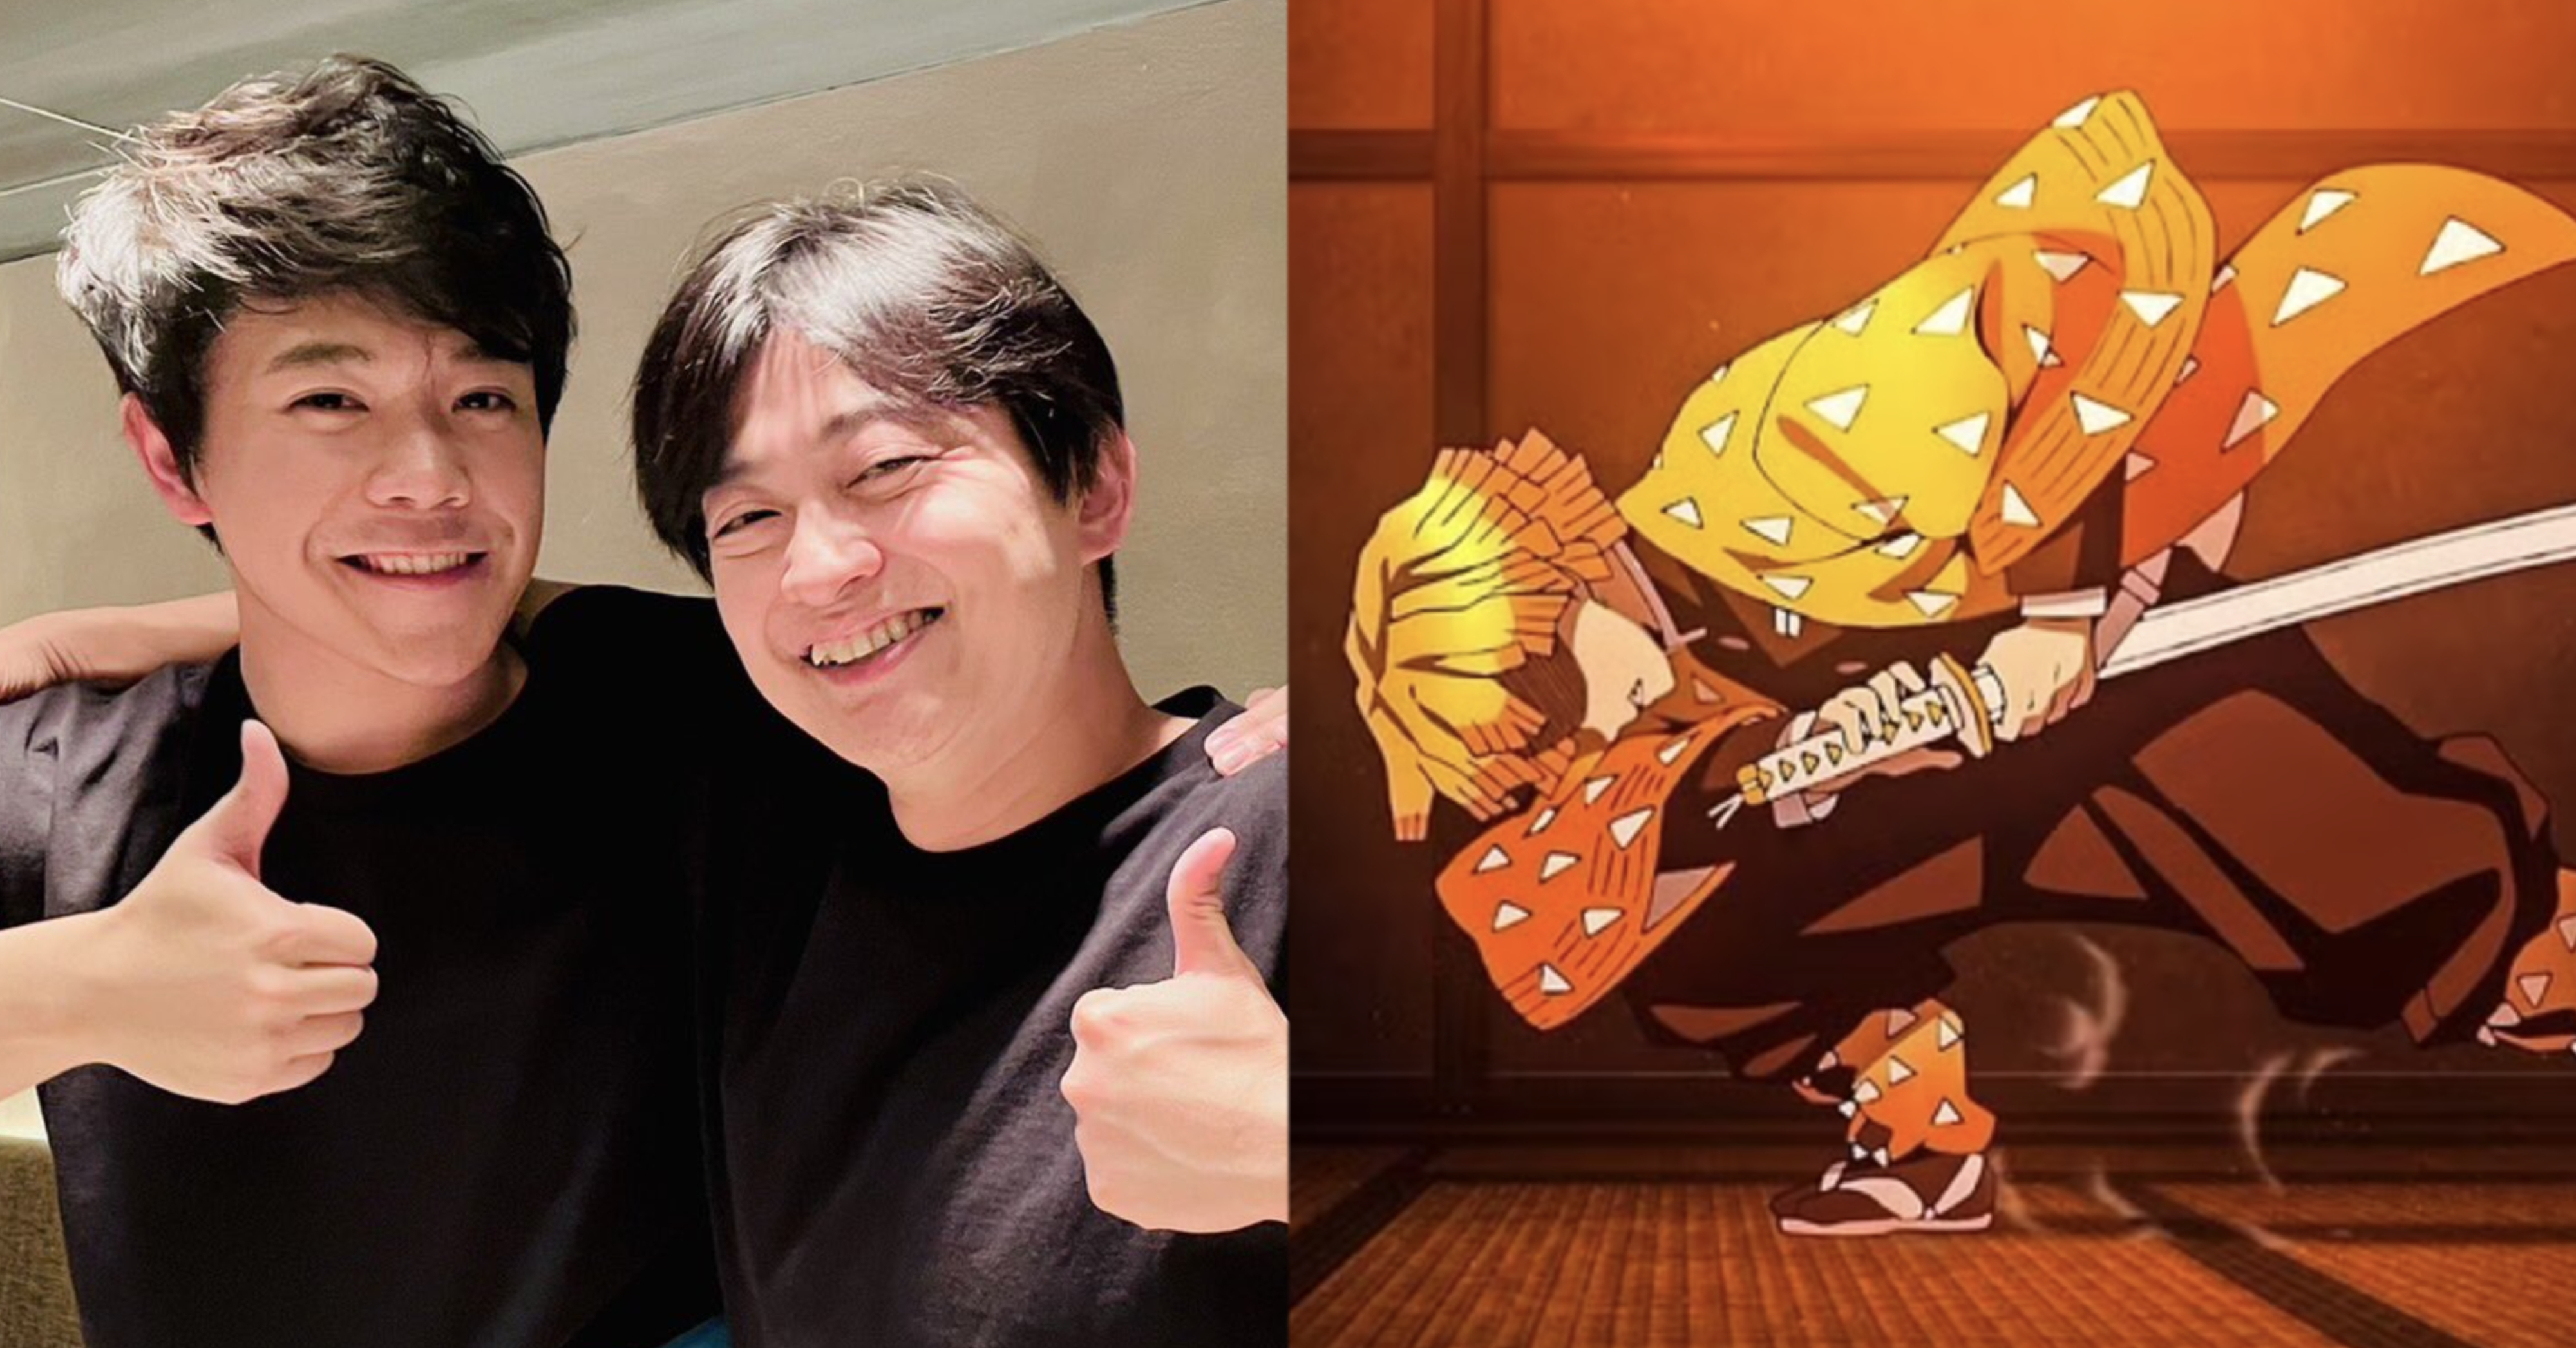 Left: Aleks and Hiro Shimono smiling while doing a thumbs up pose; Right: Zenitsu performing thunder breathing